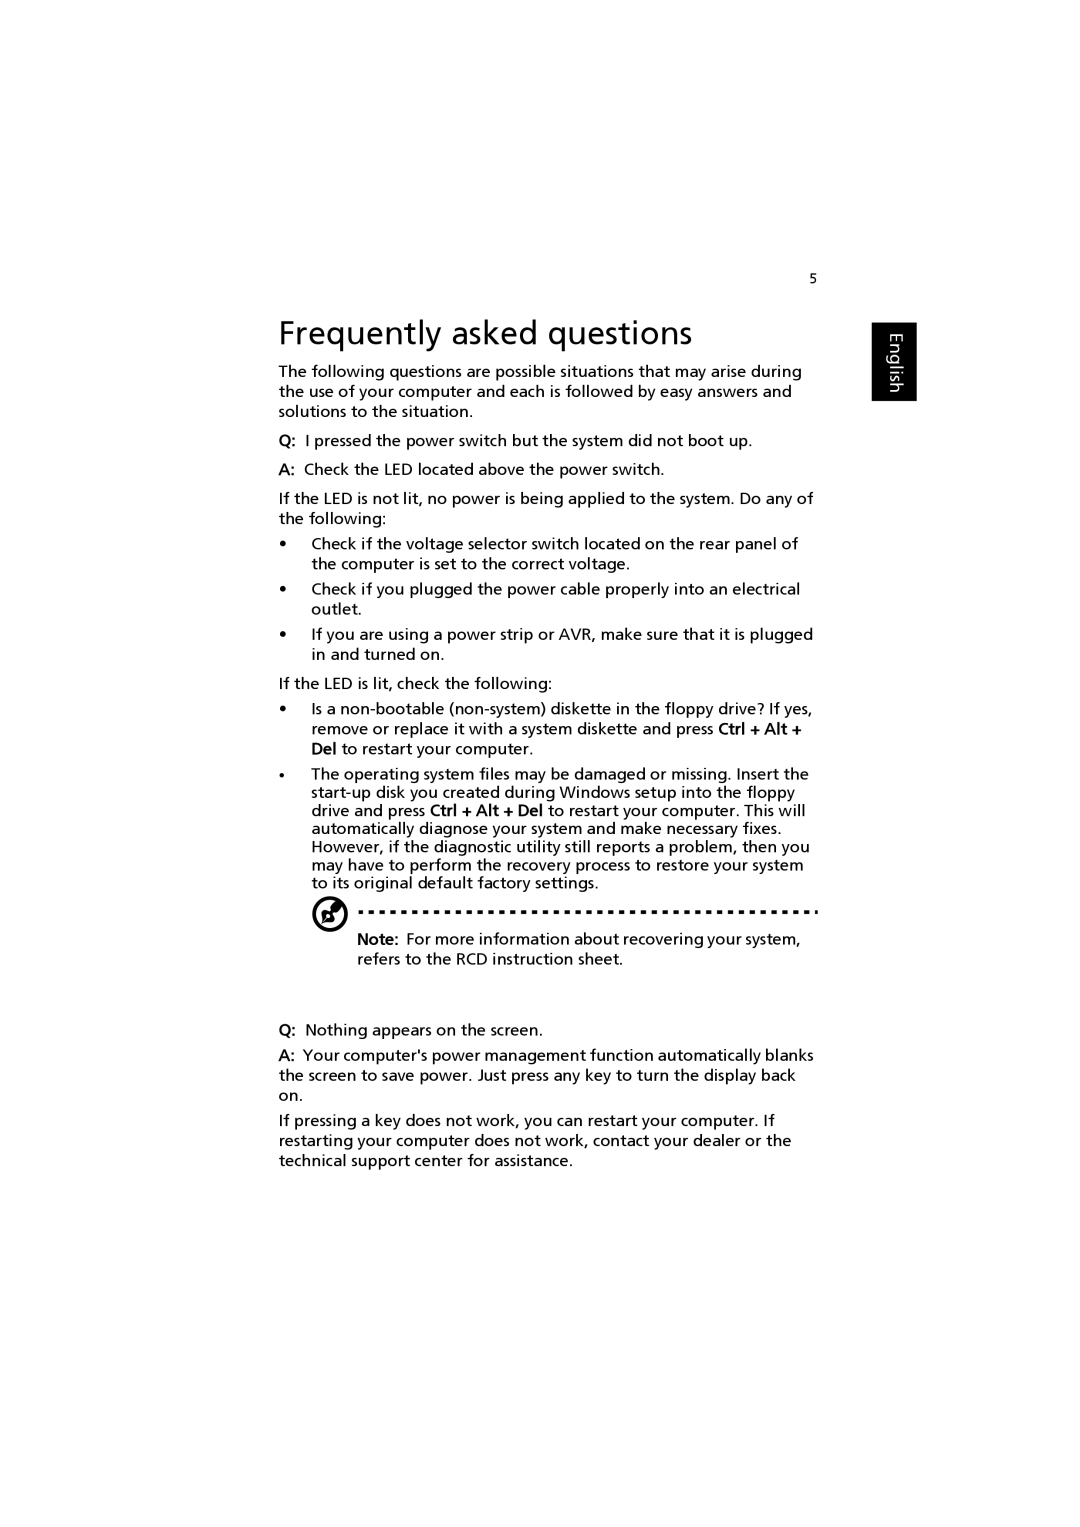 Acer X1300, AS001 manual Frequently asked questions, English 